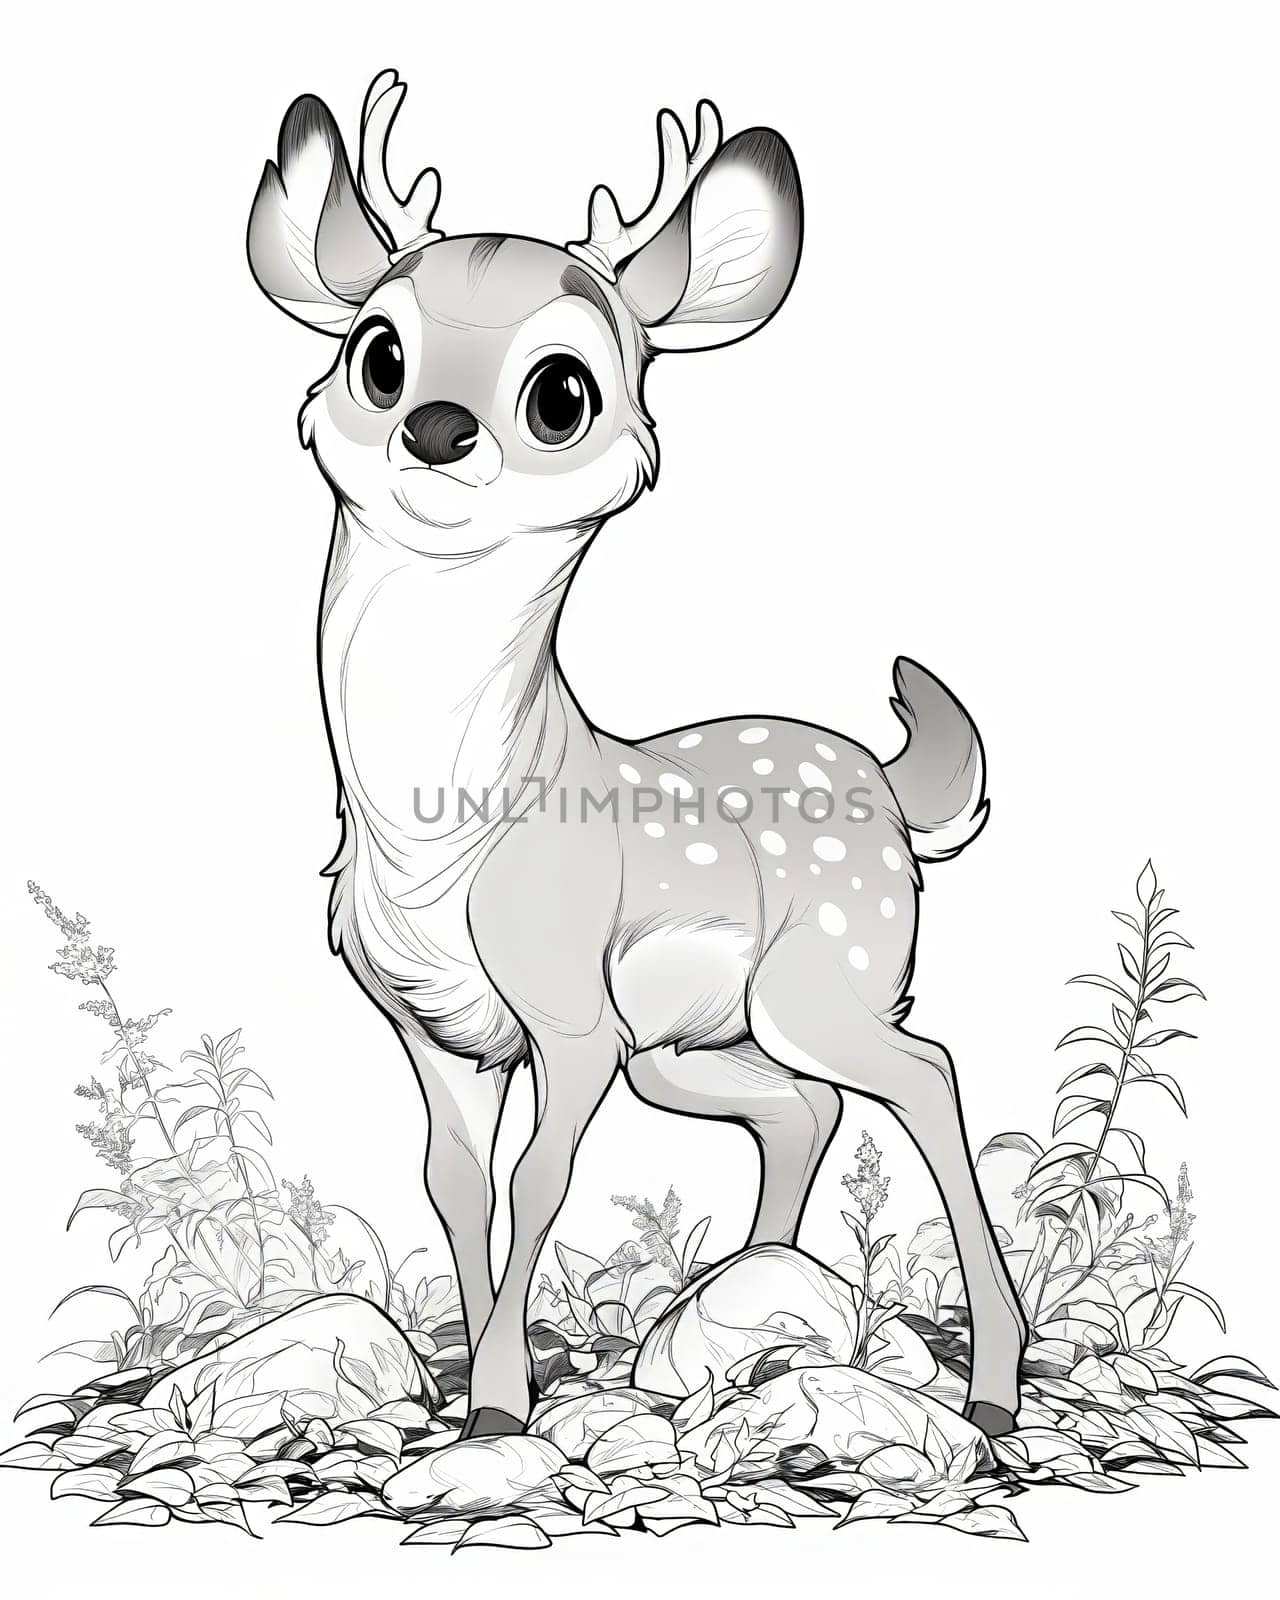 Coloring book for children, coloring animal, deer. by Fischeron